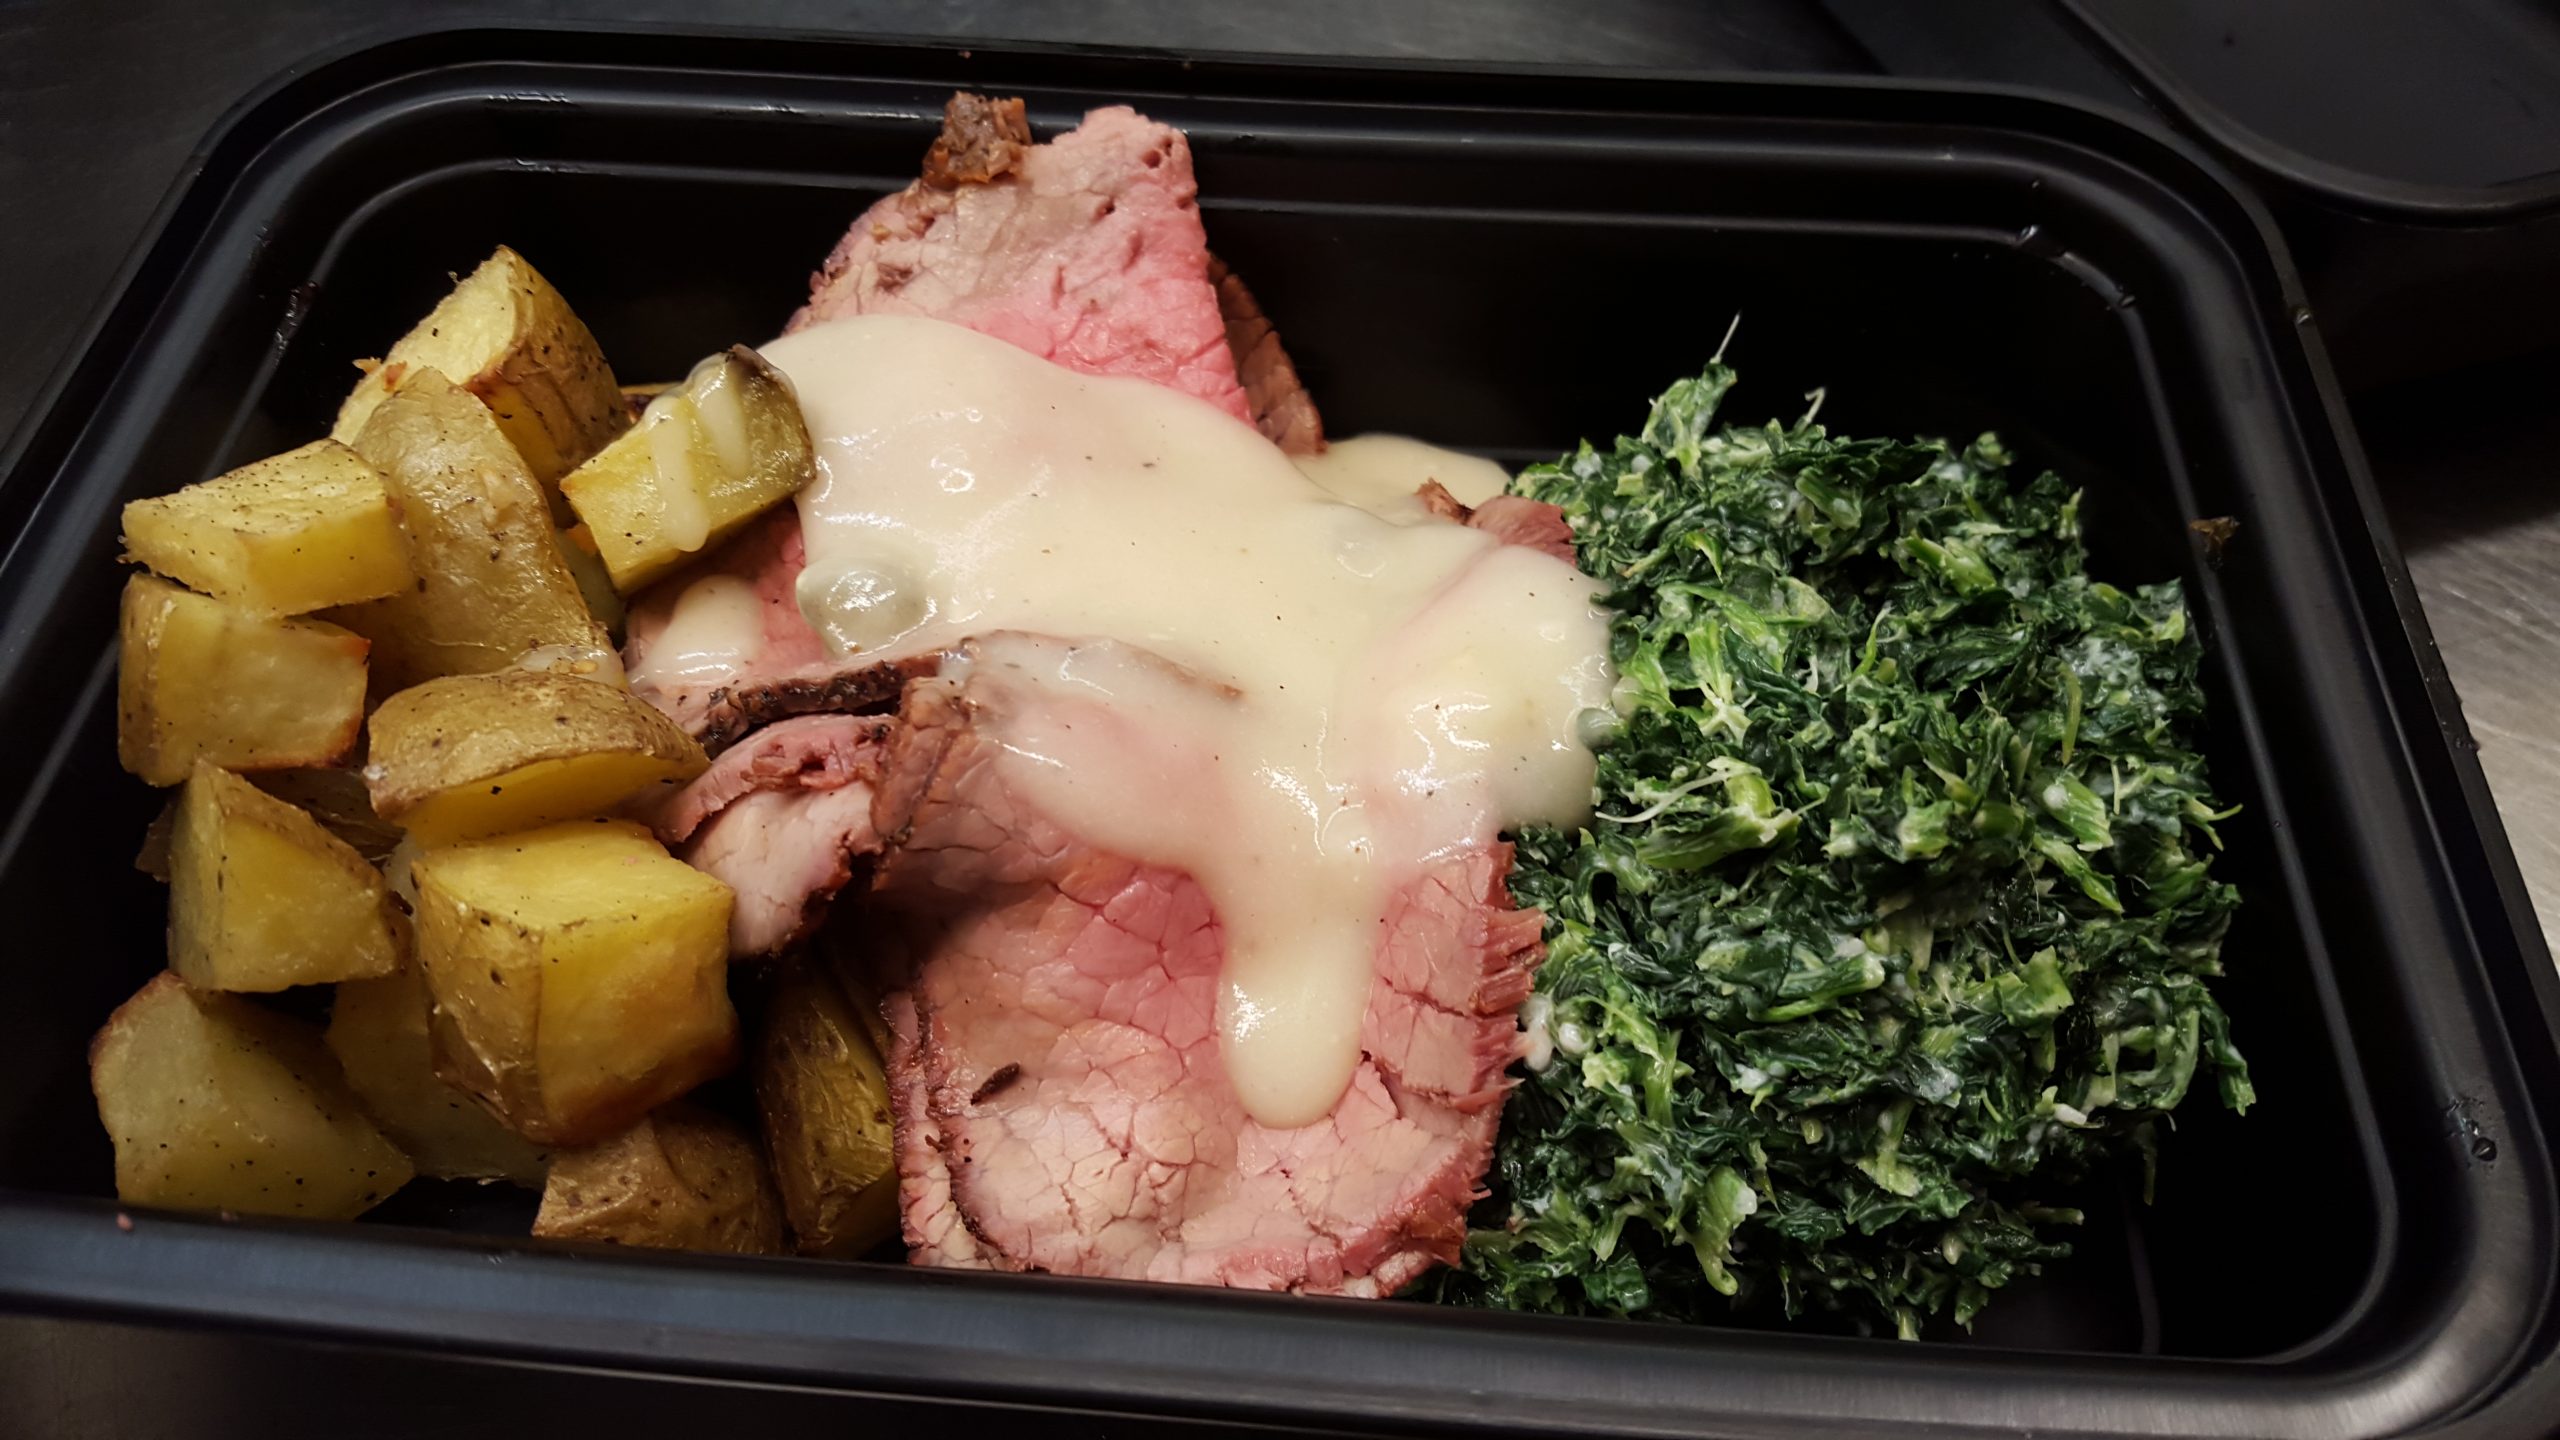 Roast Beef With Dijon Sauce, Creamed Spinach and Roasted Potatoes